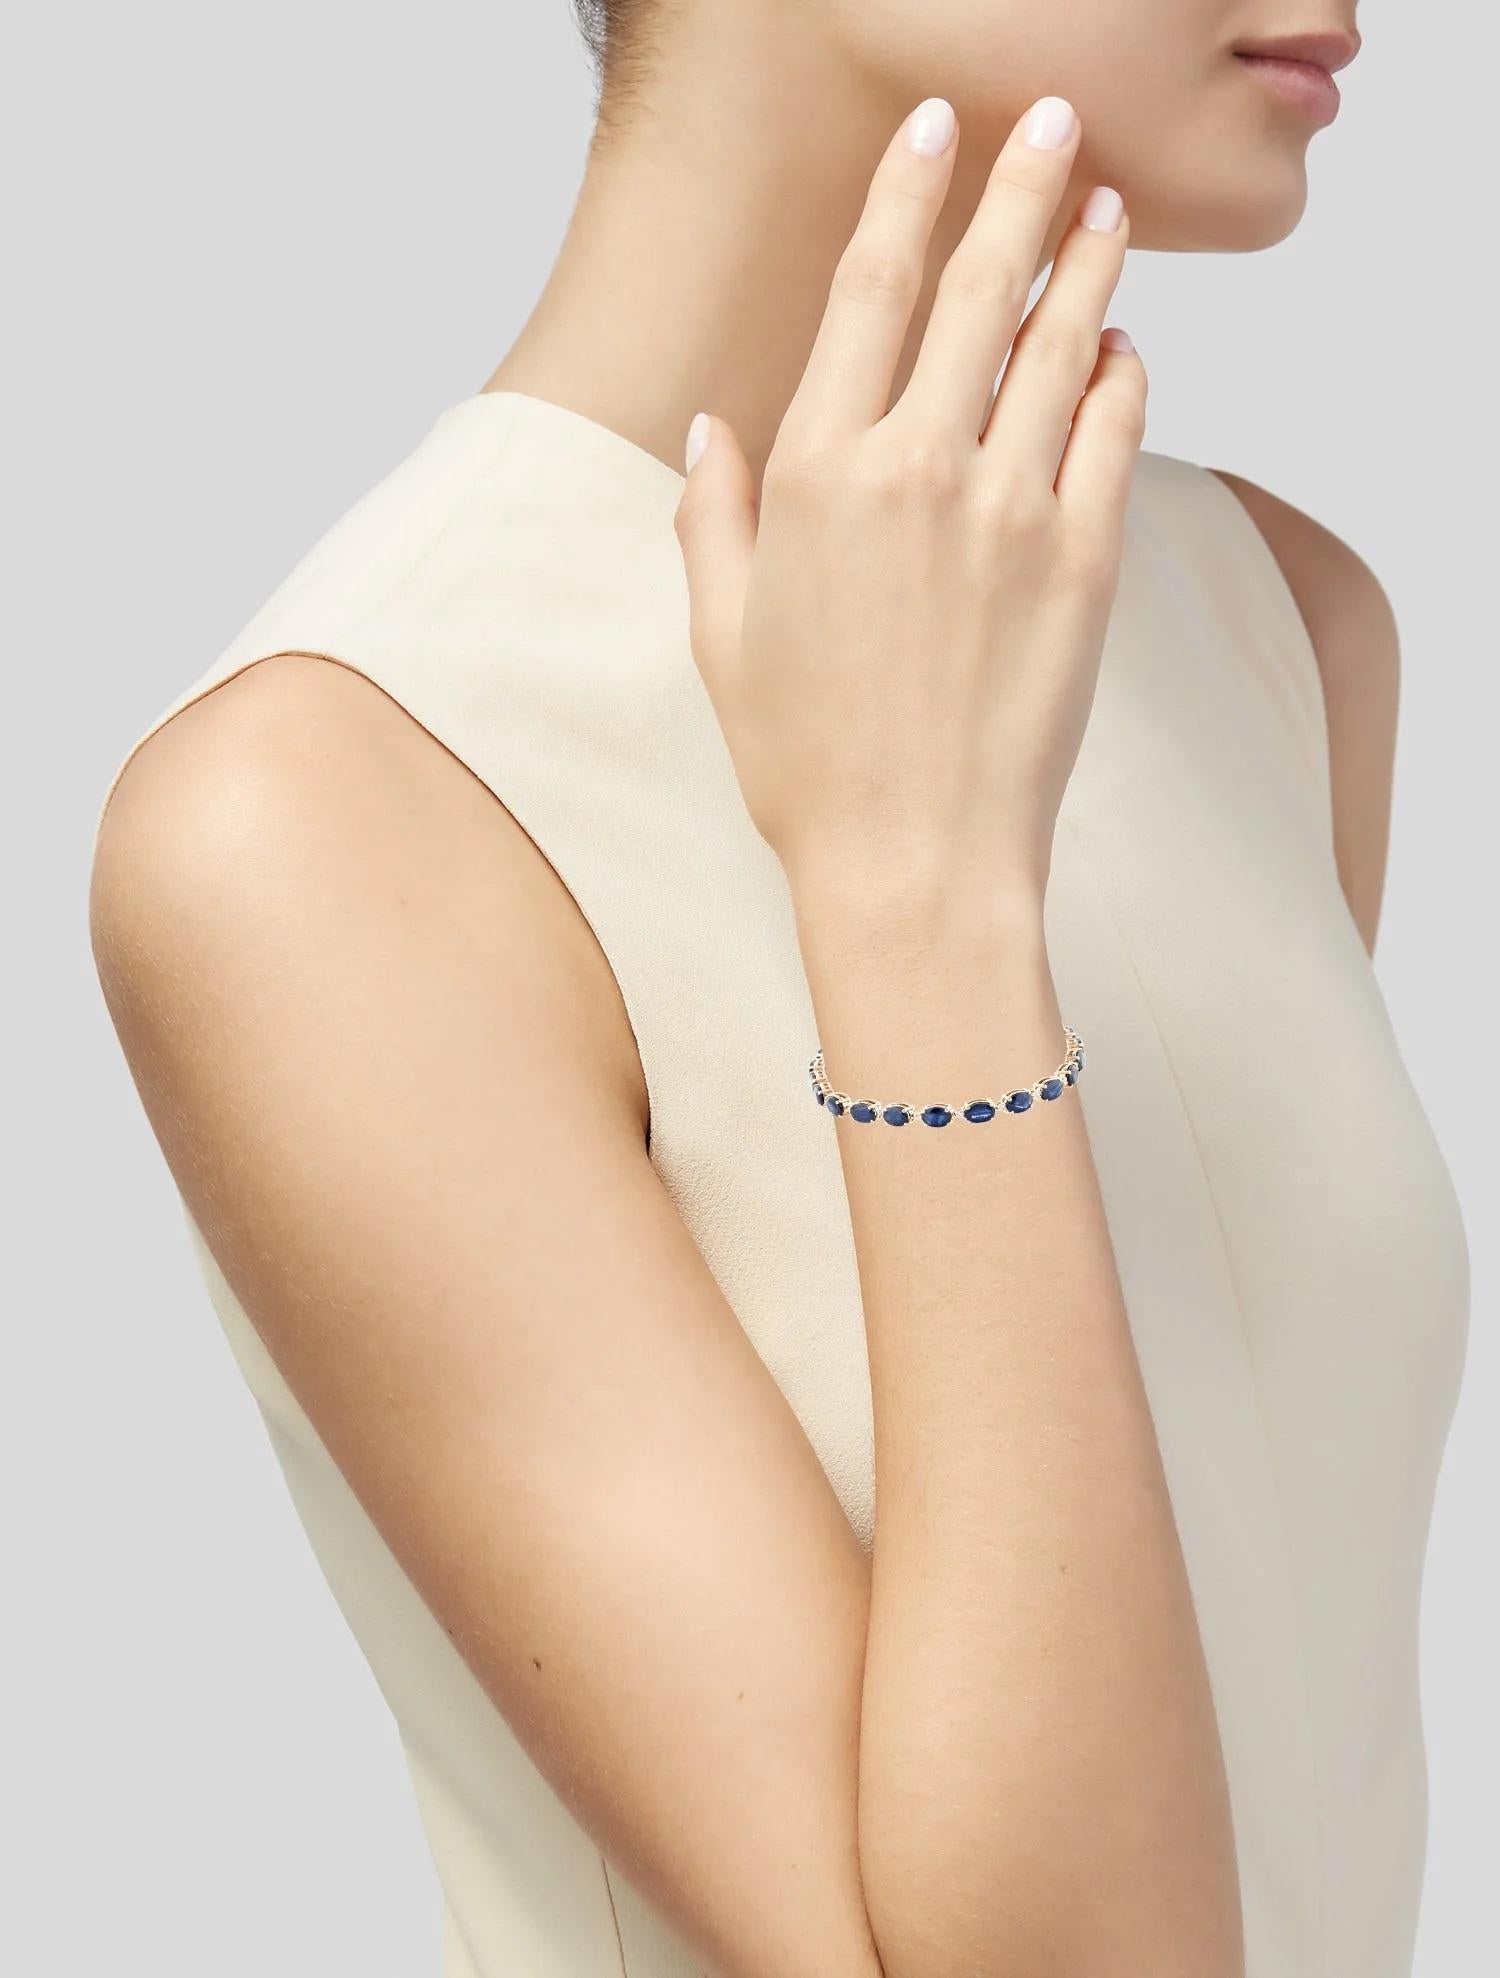 Elevate your jewelry collection with this exquisite 14K Sapphire & Diamond Link Bracelet. Crafted in gleaming yellow gold, this bracelet features a stunning array of faceted oval sapphires, totaling 13.21 carats, in a captivating blue hue that